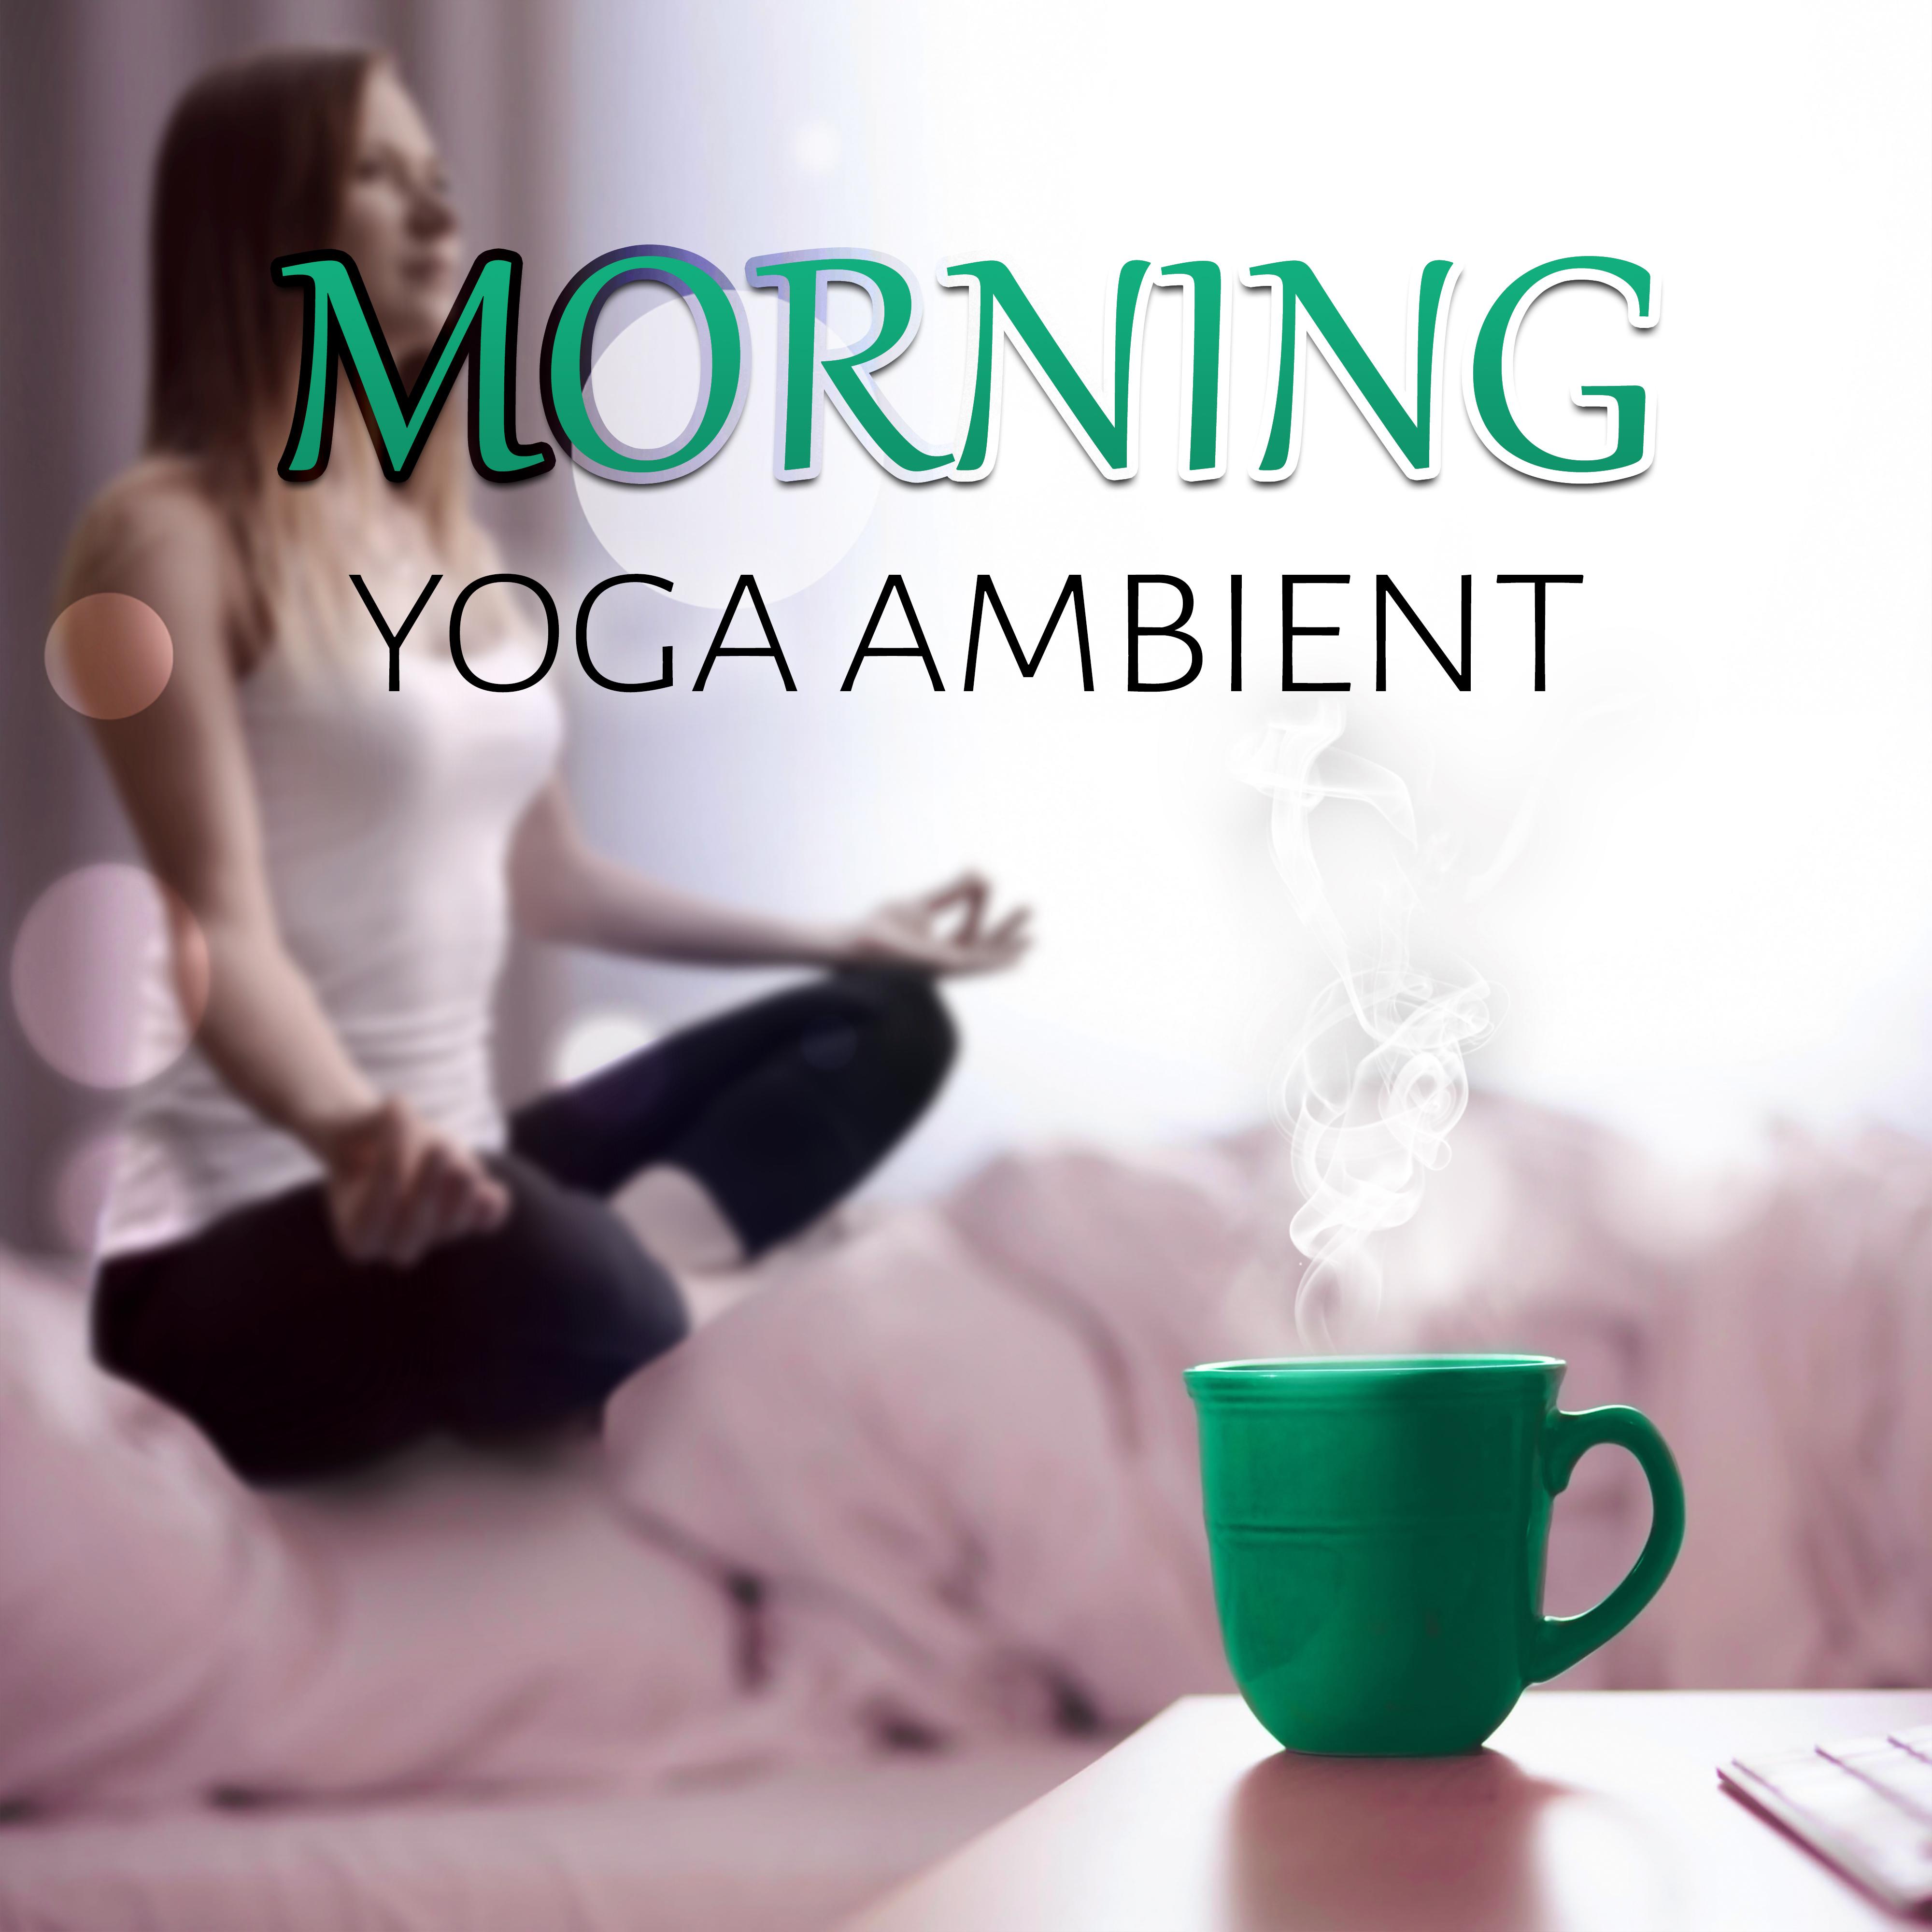 Morning Yoga - Ambient – Meditation, Early Morning, Calming Music, Relaxing New Age, Body Energy, Serenity Music, Nature Sounds